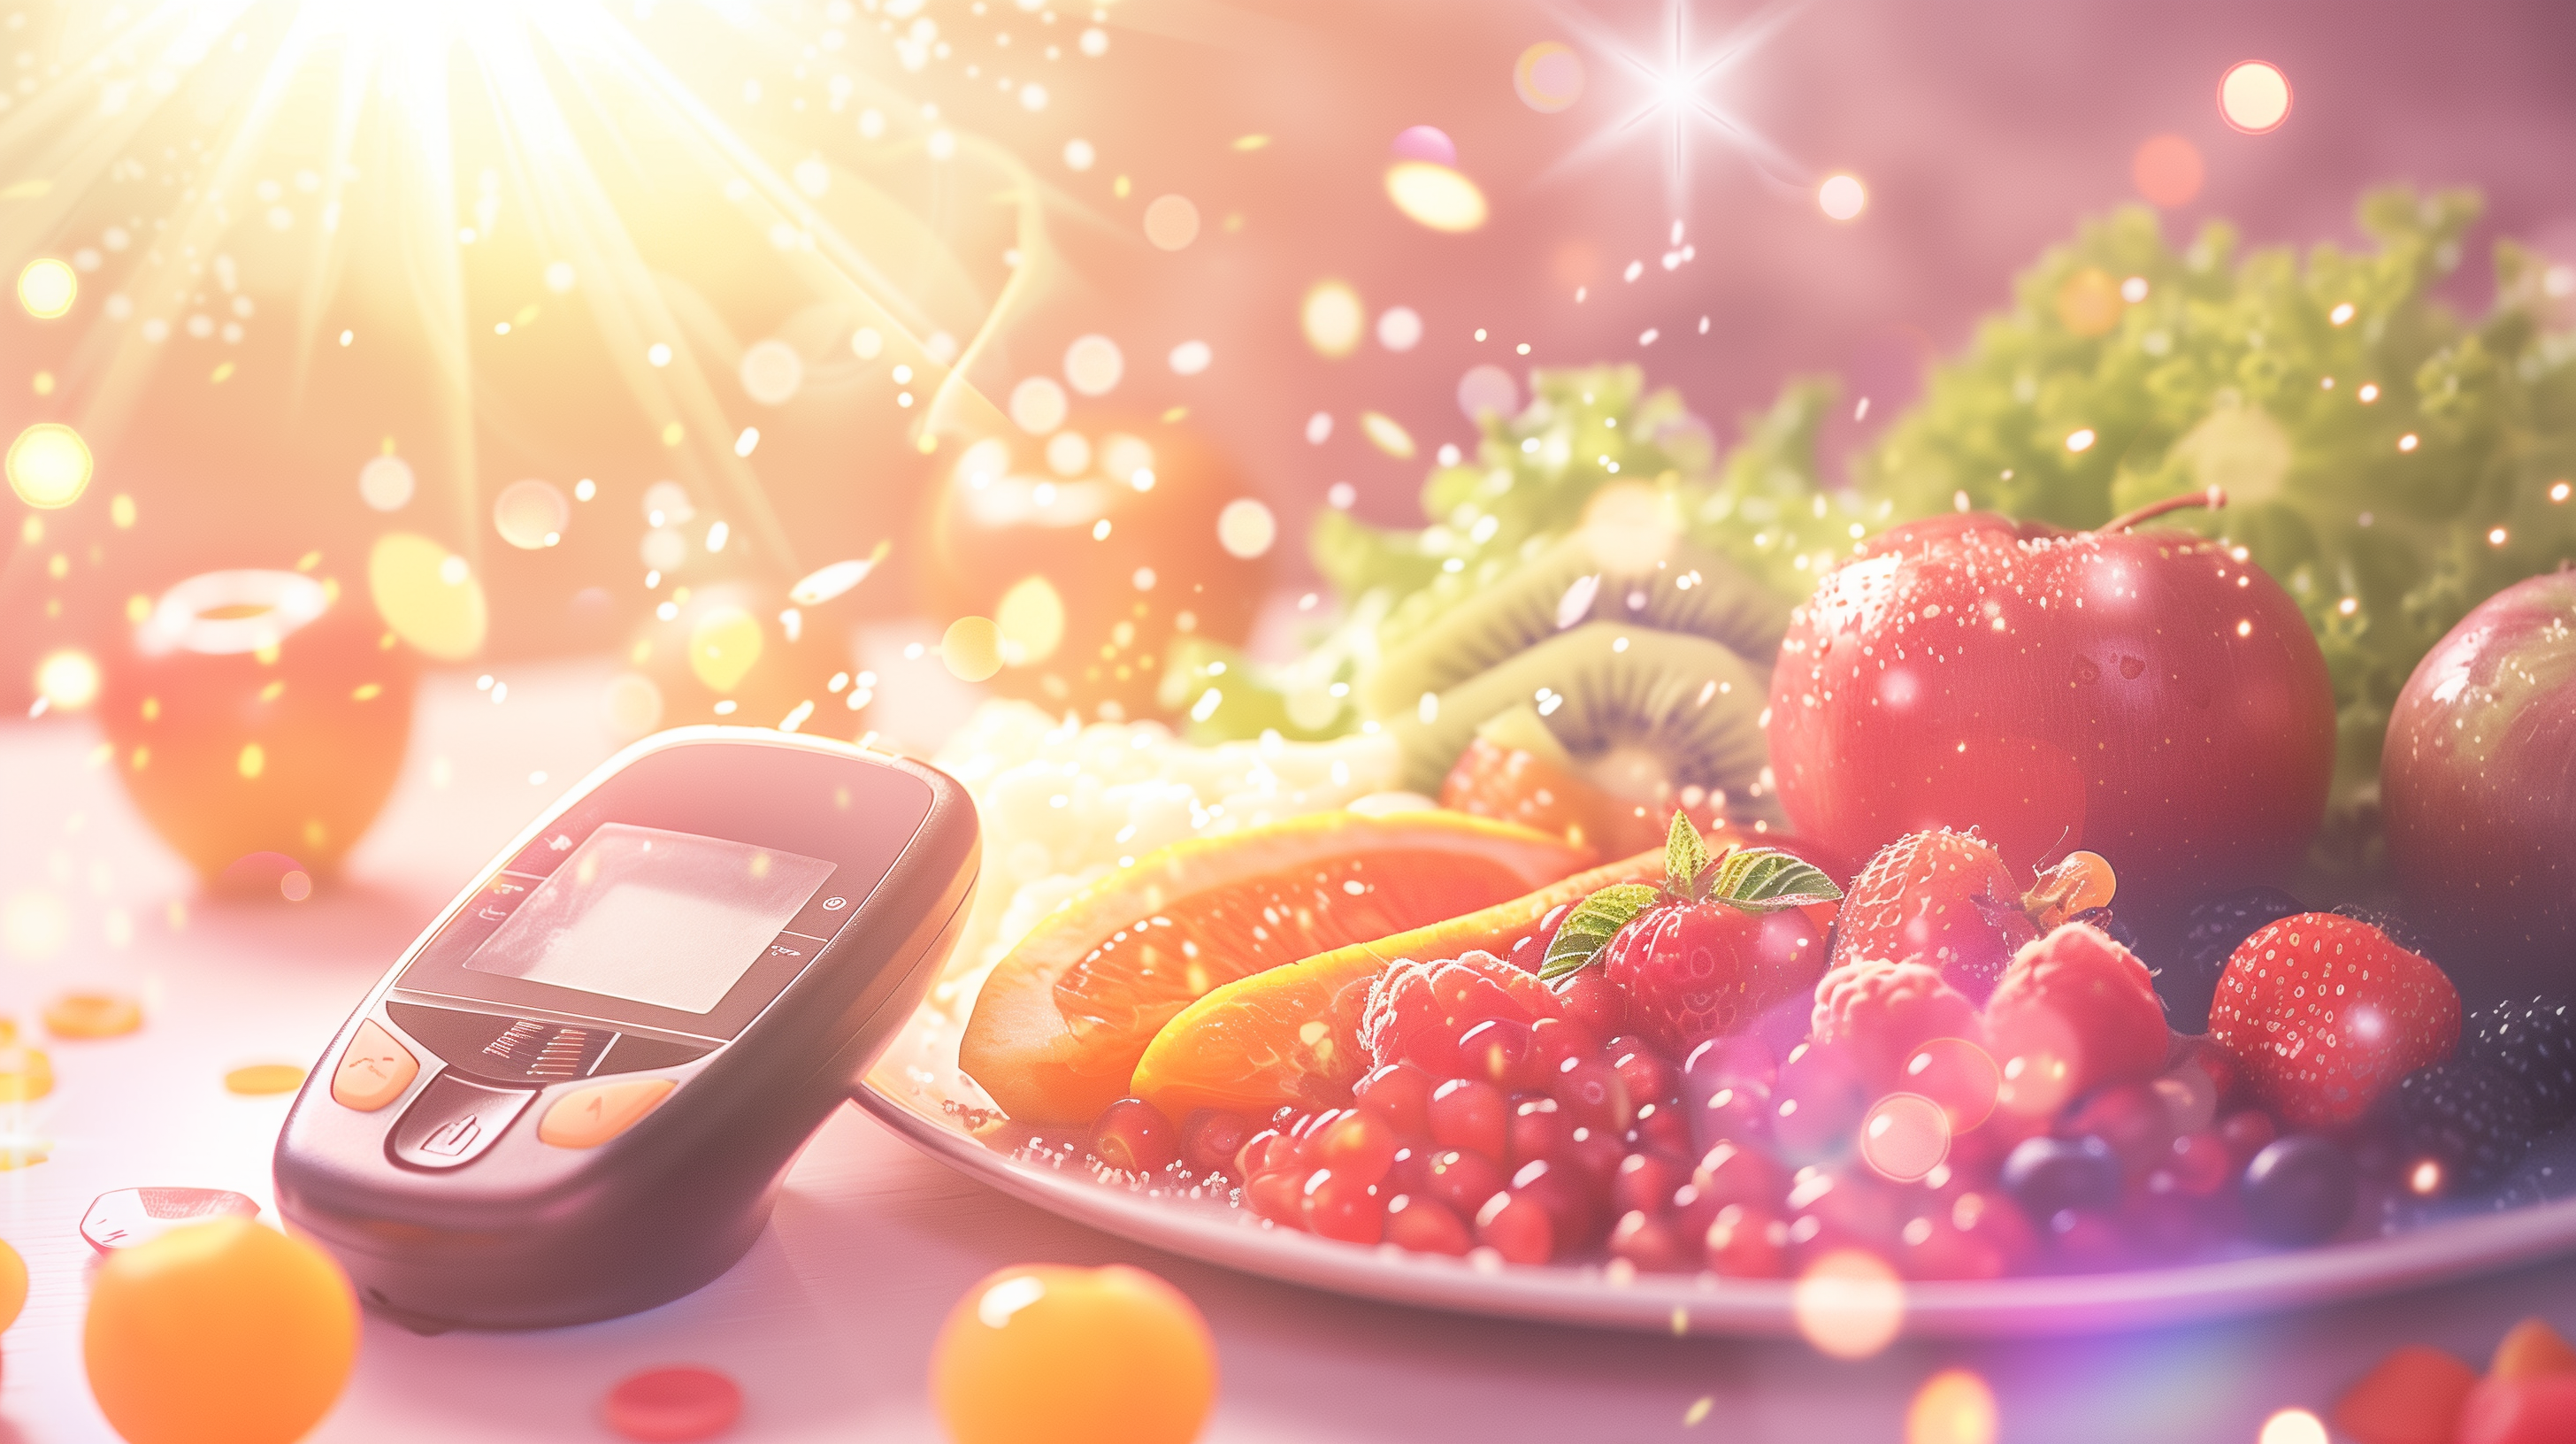 fruits, vegetables, whole grains, and lean protein, alongside a glucometer